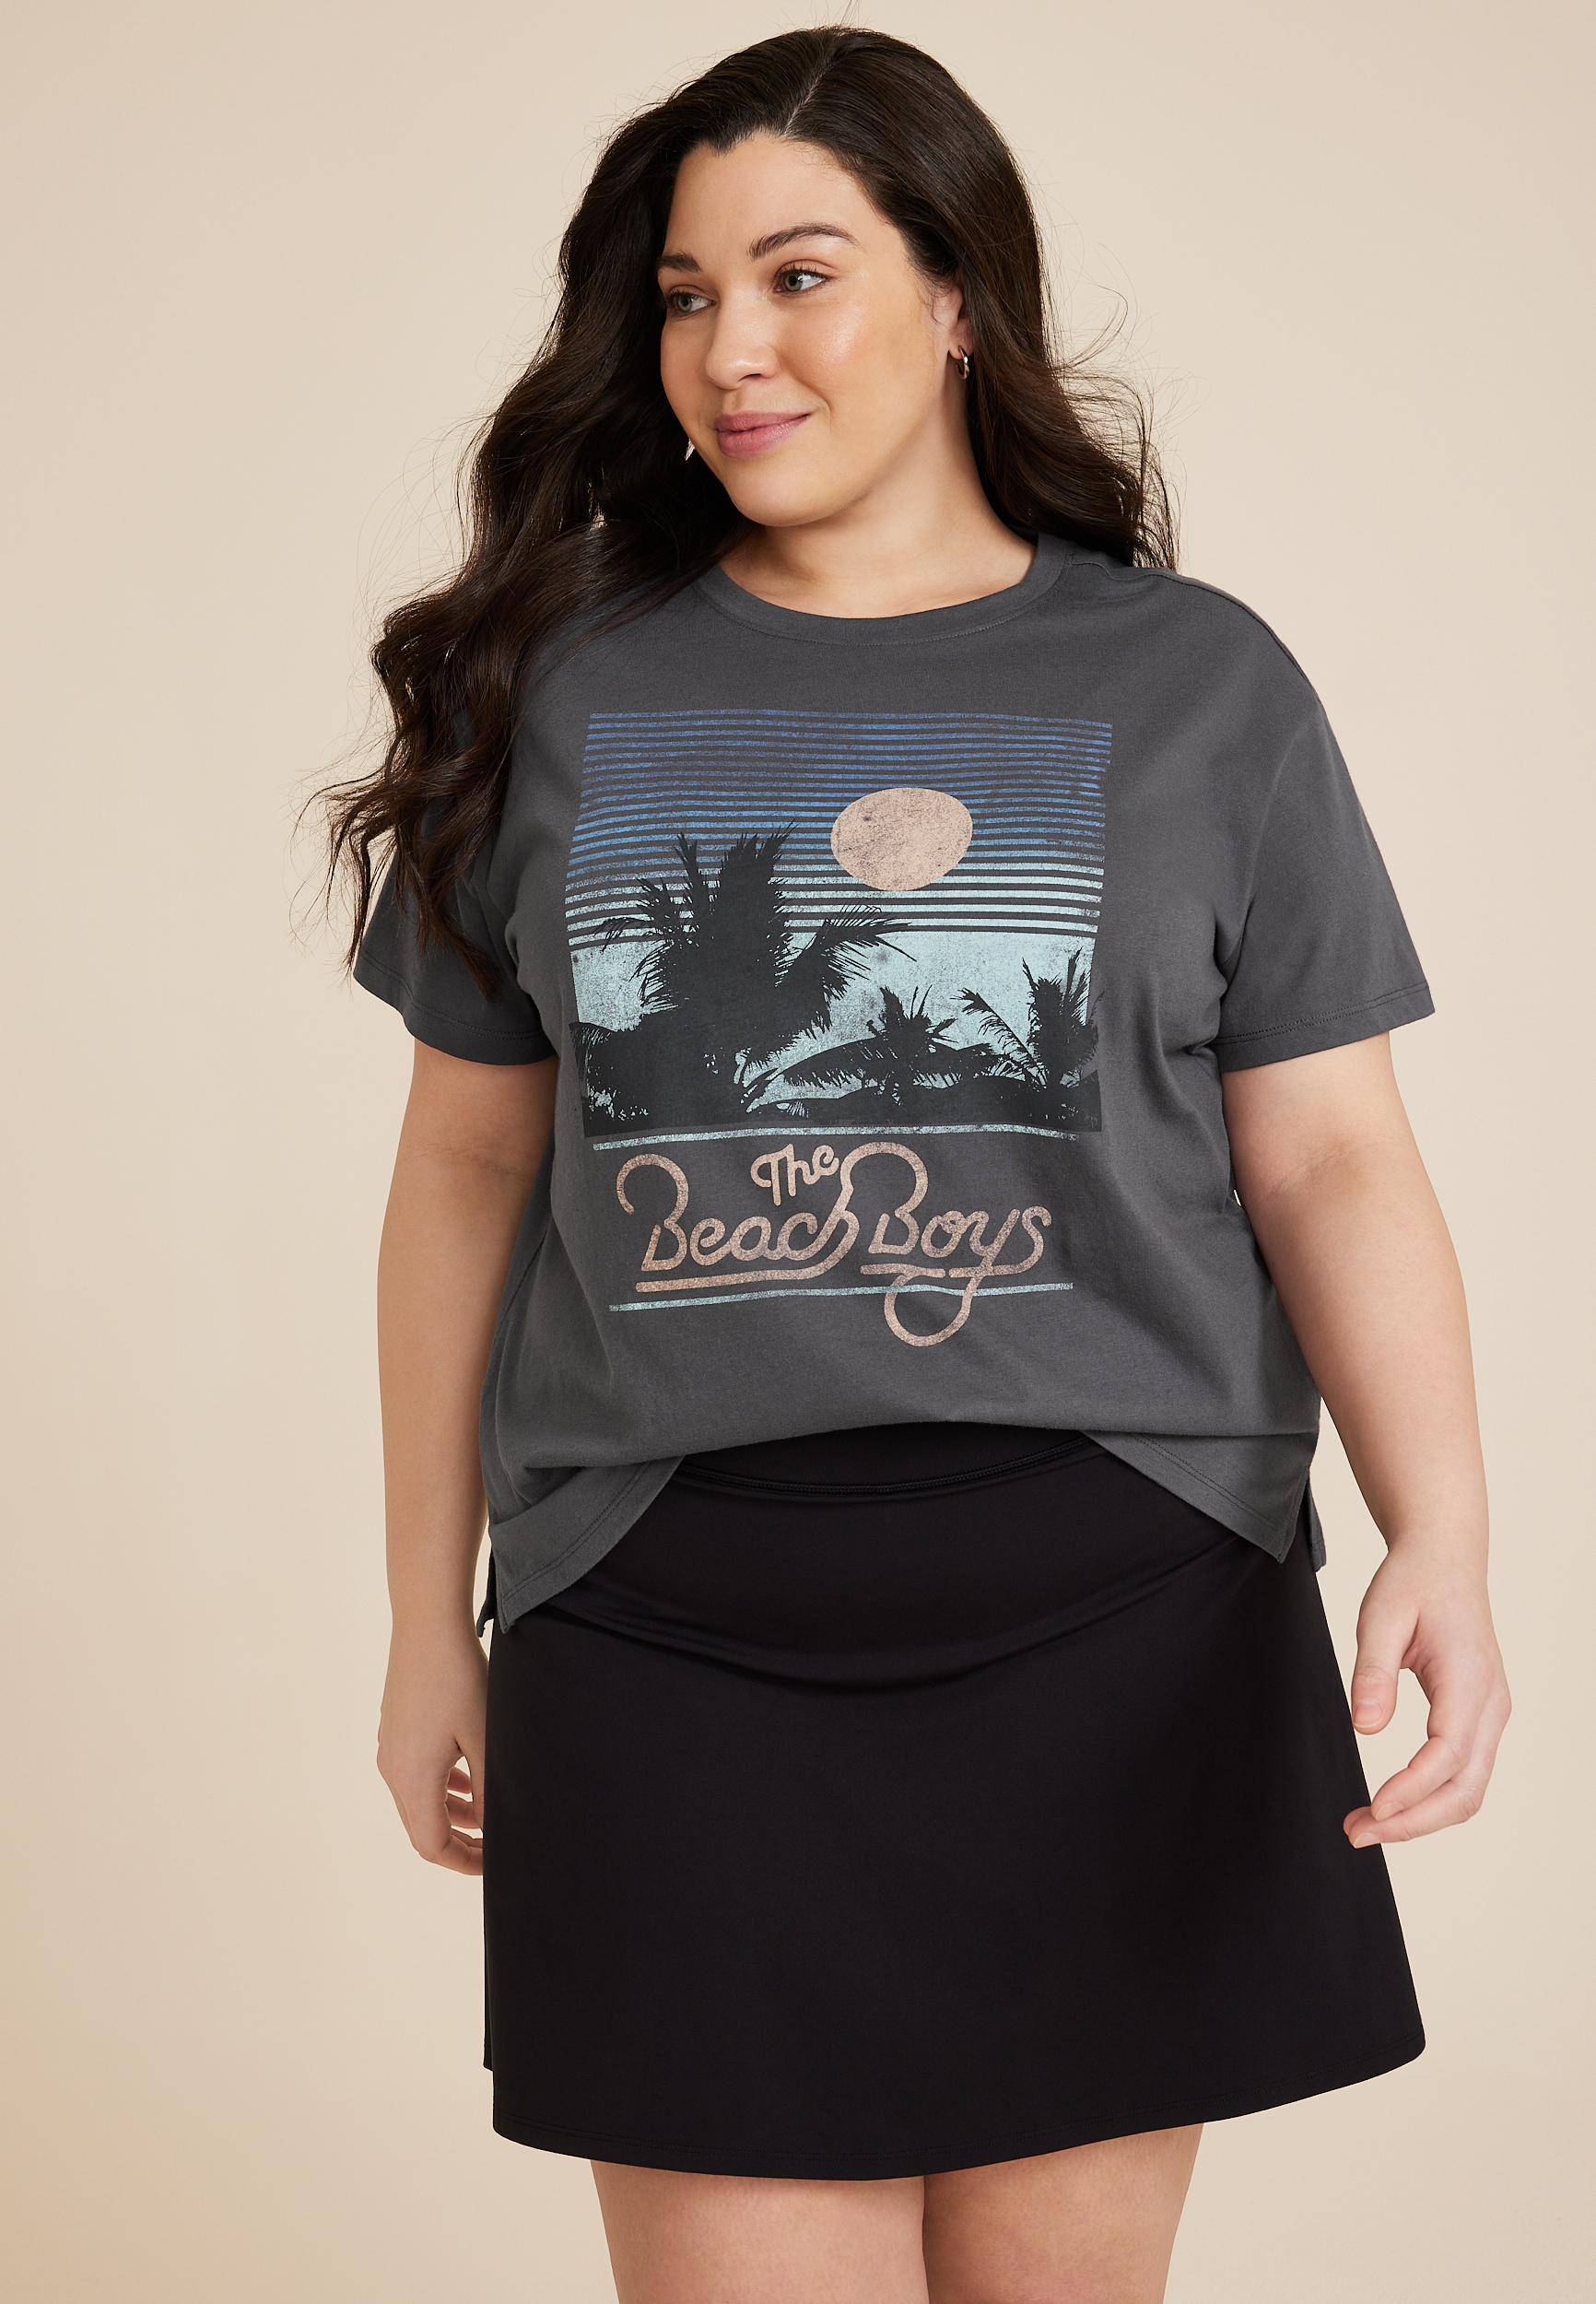 Plus Size Tees: Basic, Graphic, Knit, Long Sleeve & More